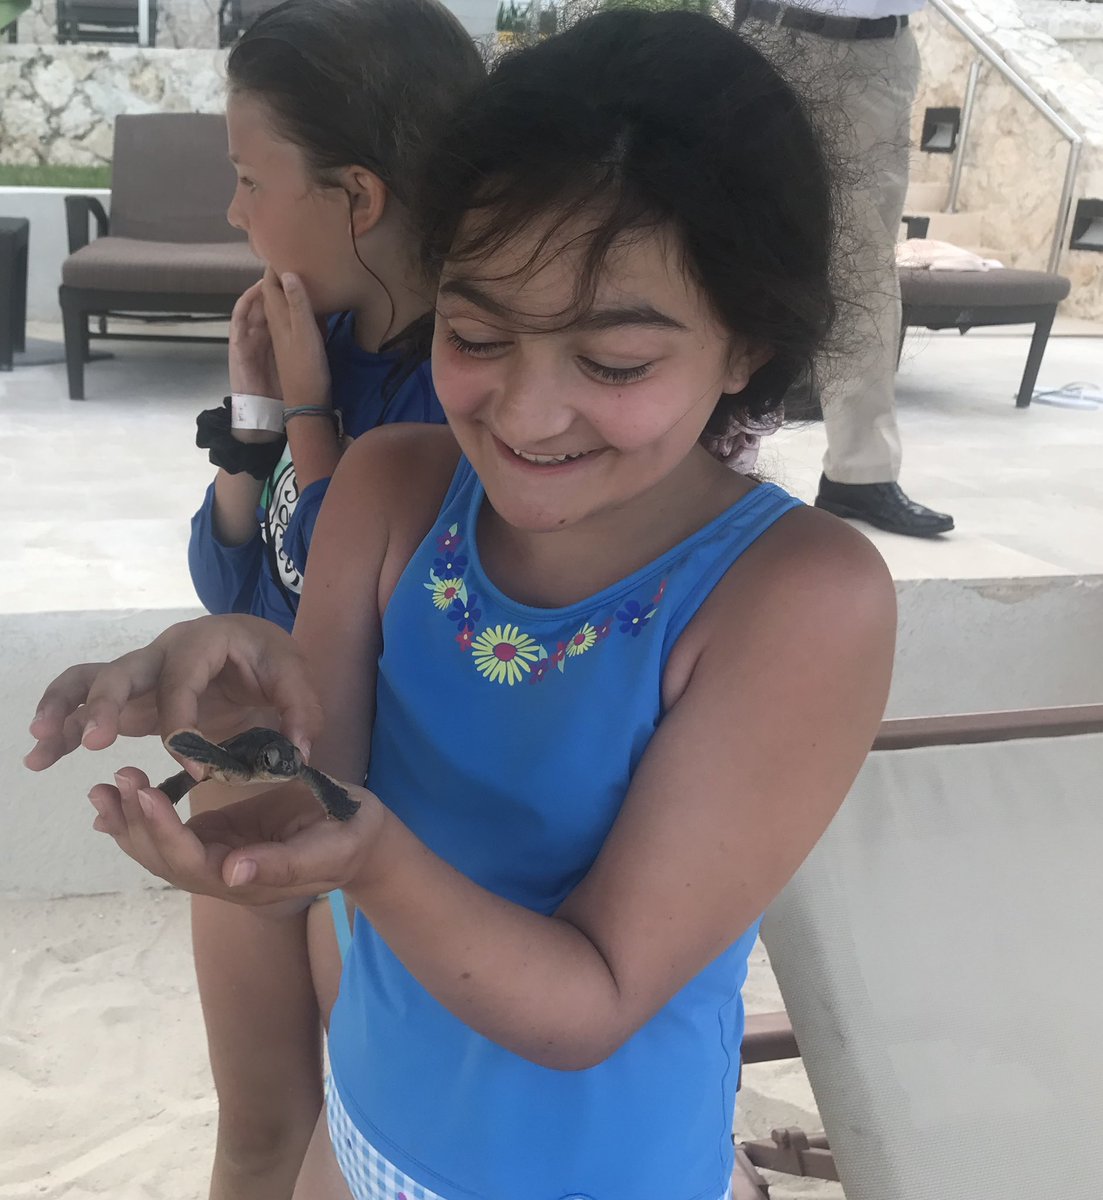 In love with this weeks #Too4Theme of #Top4Tiny 

Tag hosts, add your pics & retweet @Giselleinmotion @CharlesMcCool @perthtravelers @Touchse 

My niece holding a baby alligator, New Orlesns
Bee in my garden 
Big web but tiny spider
My daughter holding a baby sea turtle, #Cancun